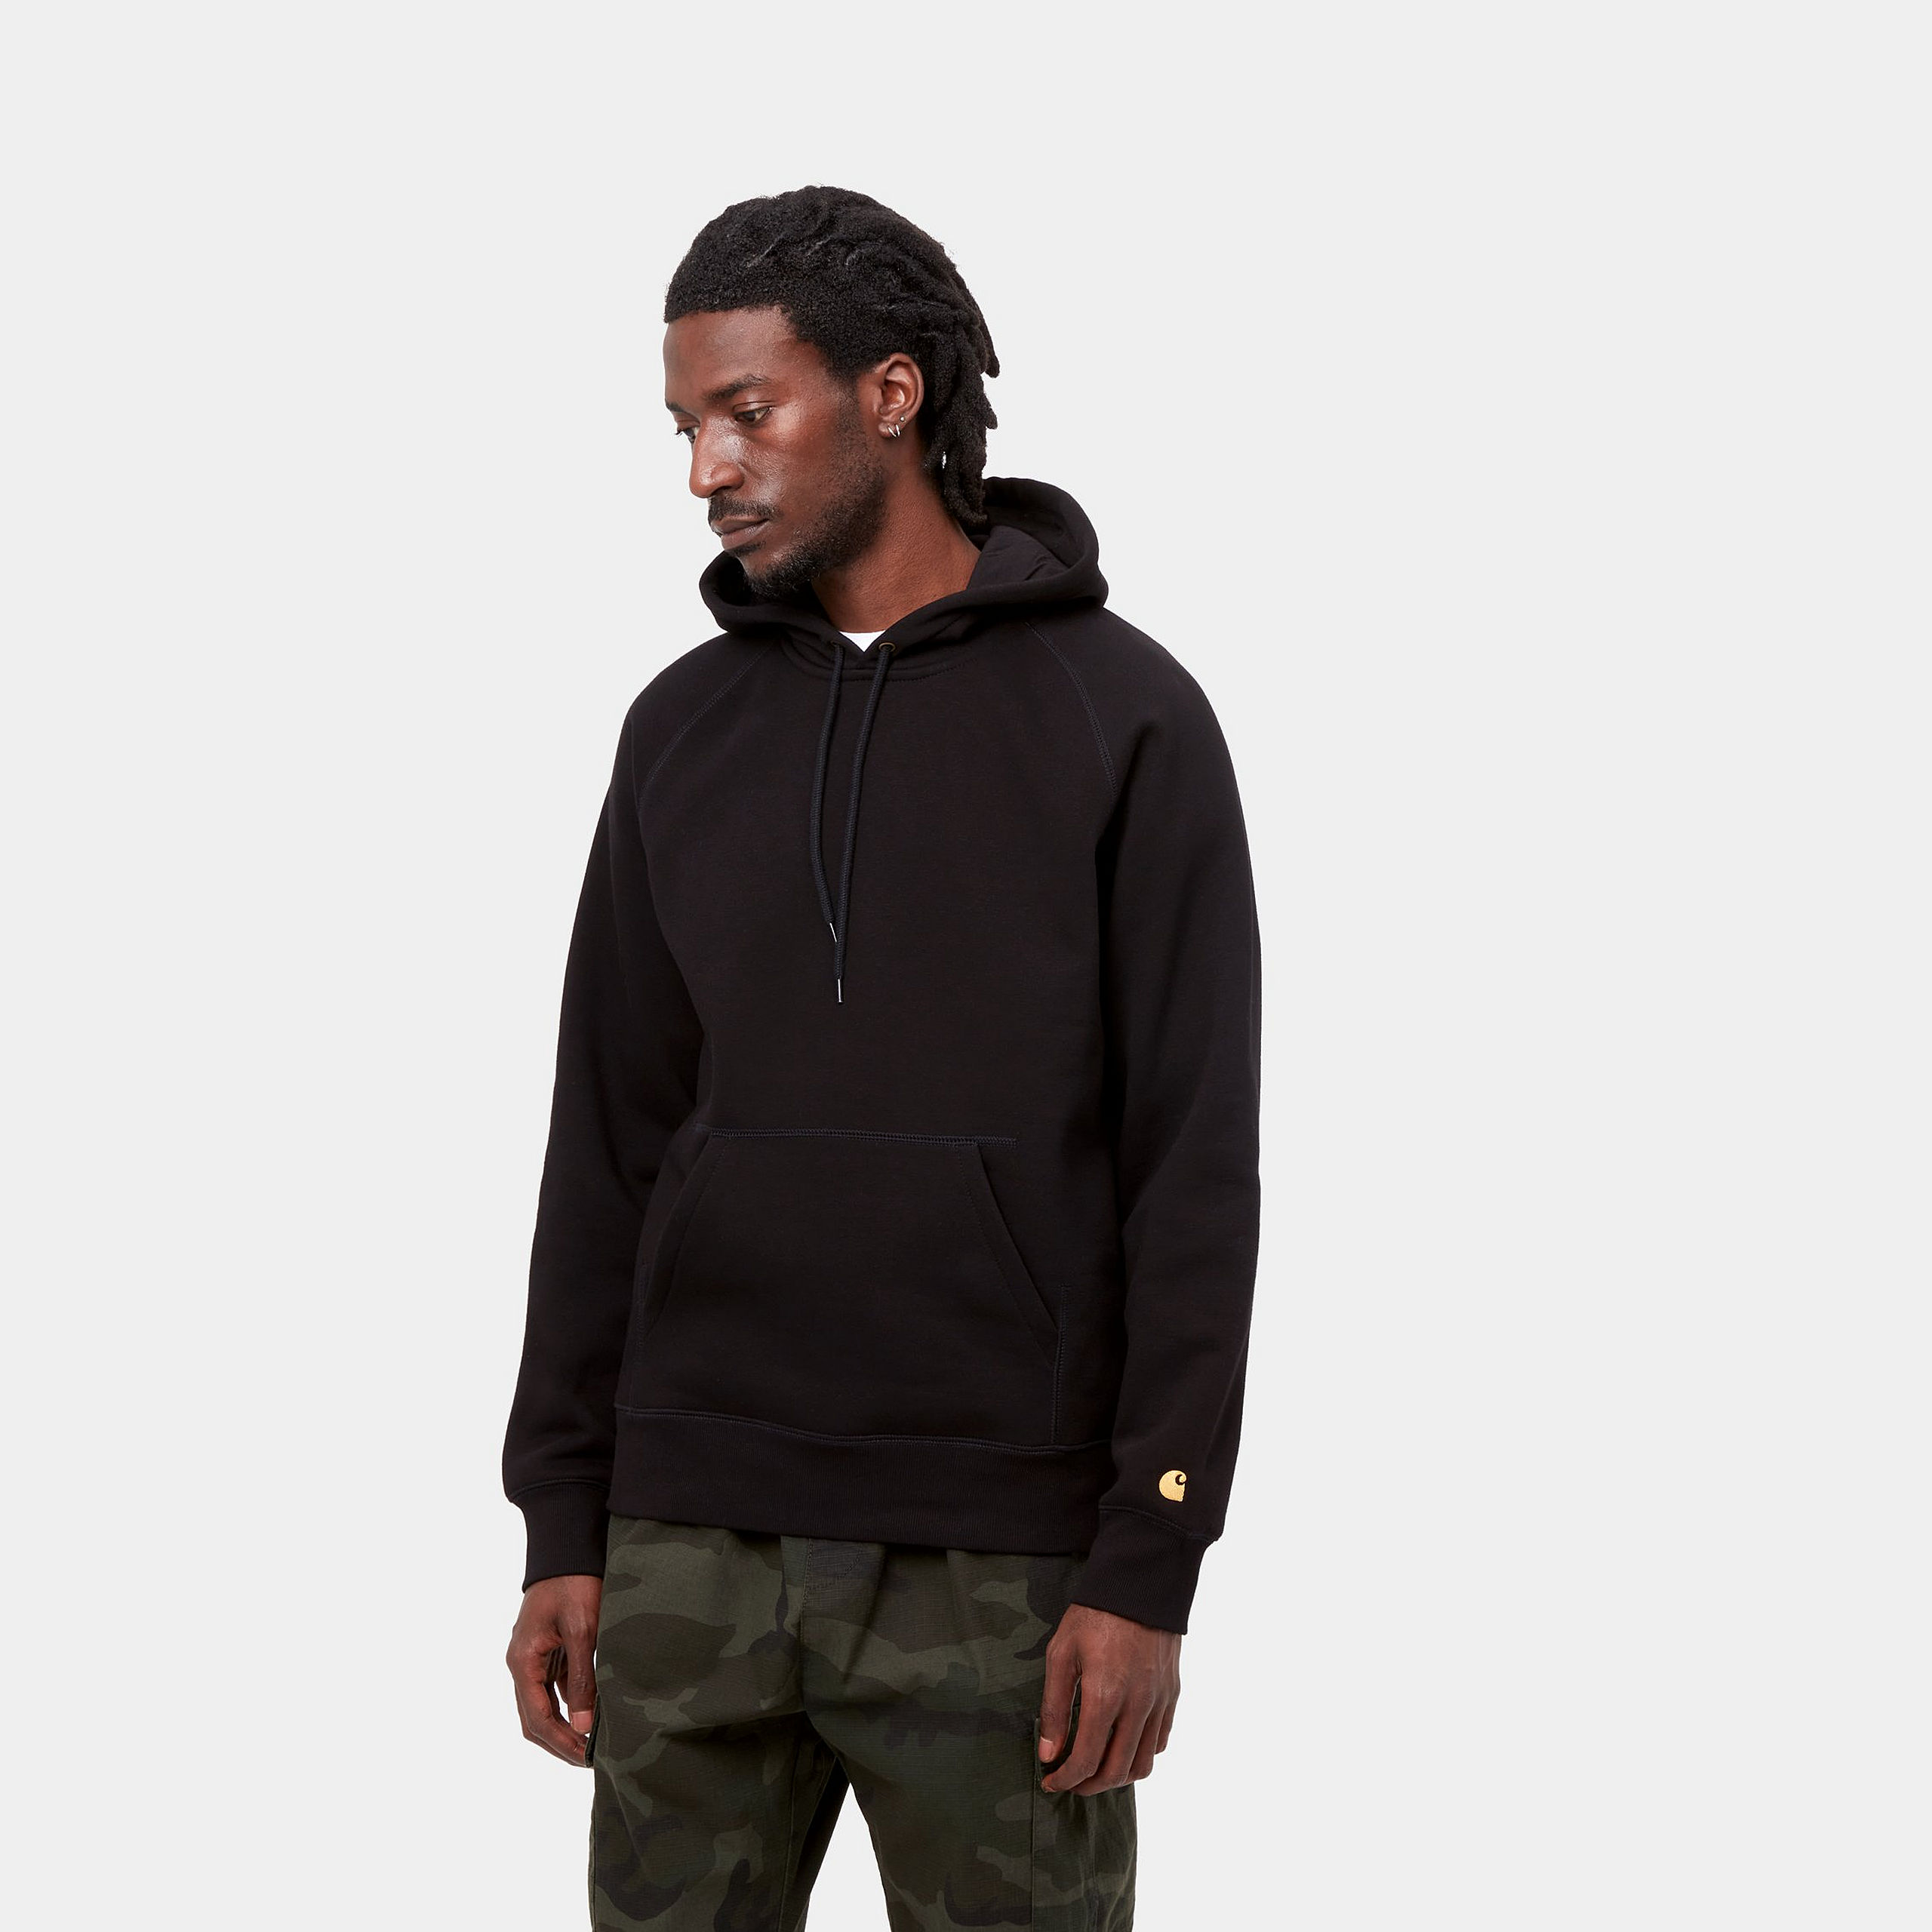 Carhartt WIP - HOODED CHASE SWEAT - Black/Gold